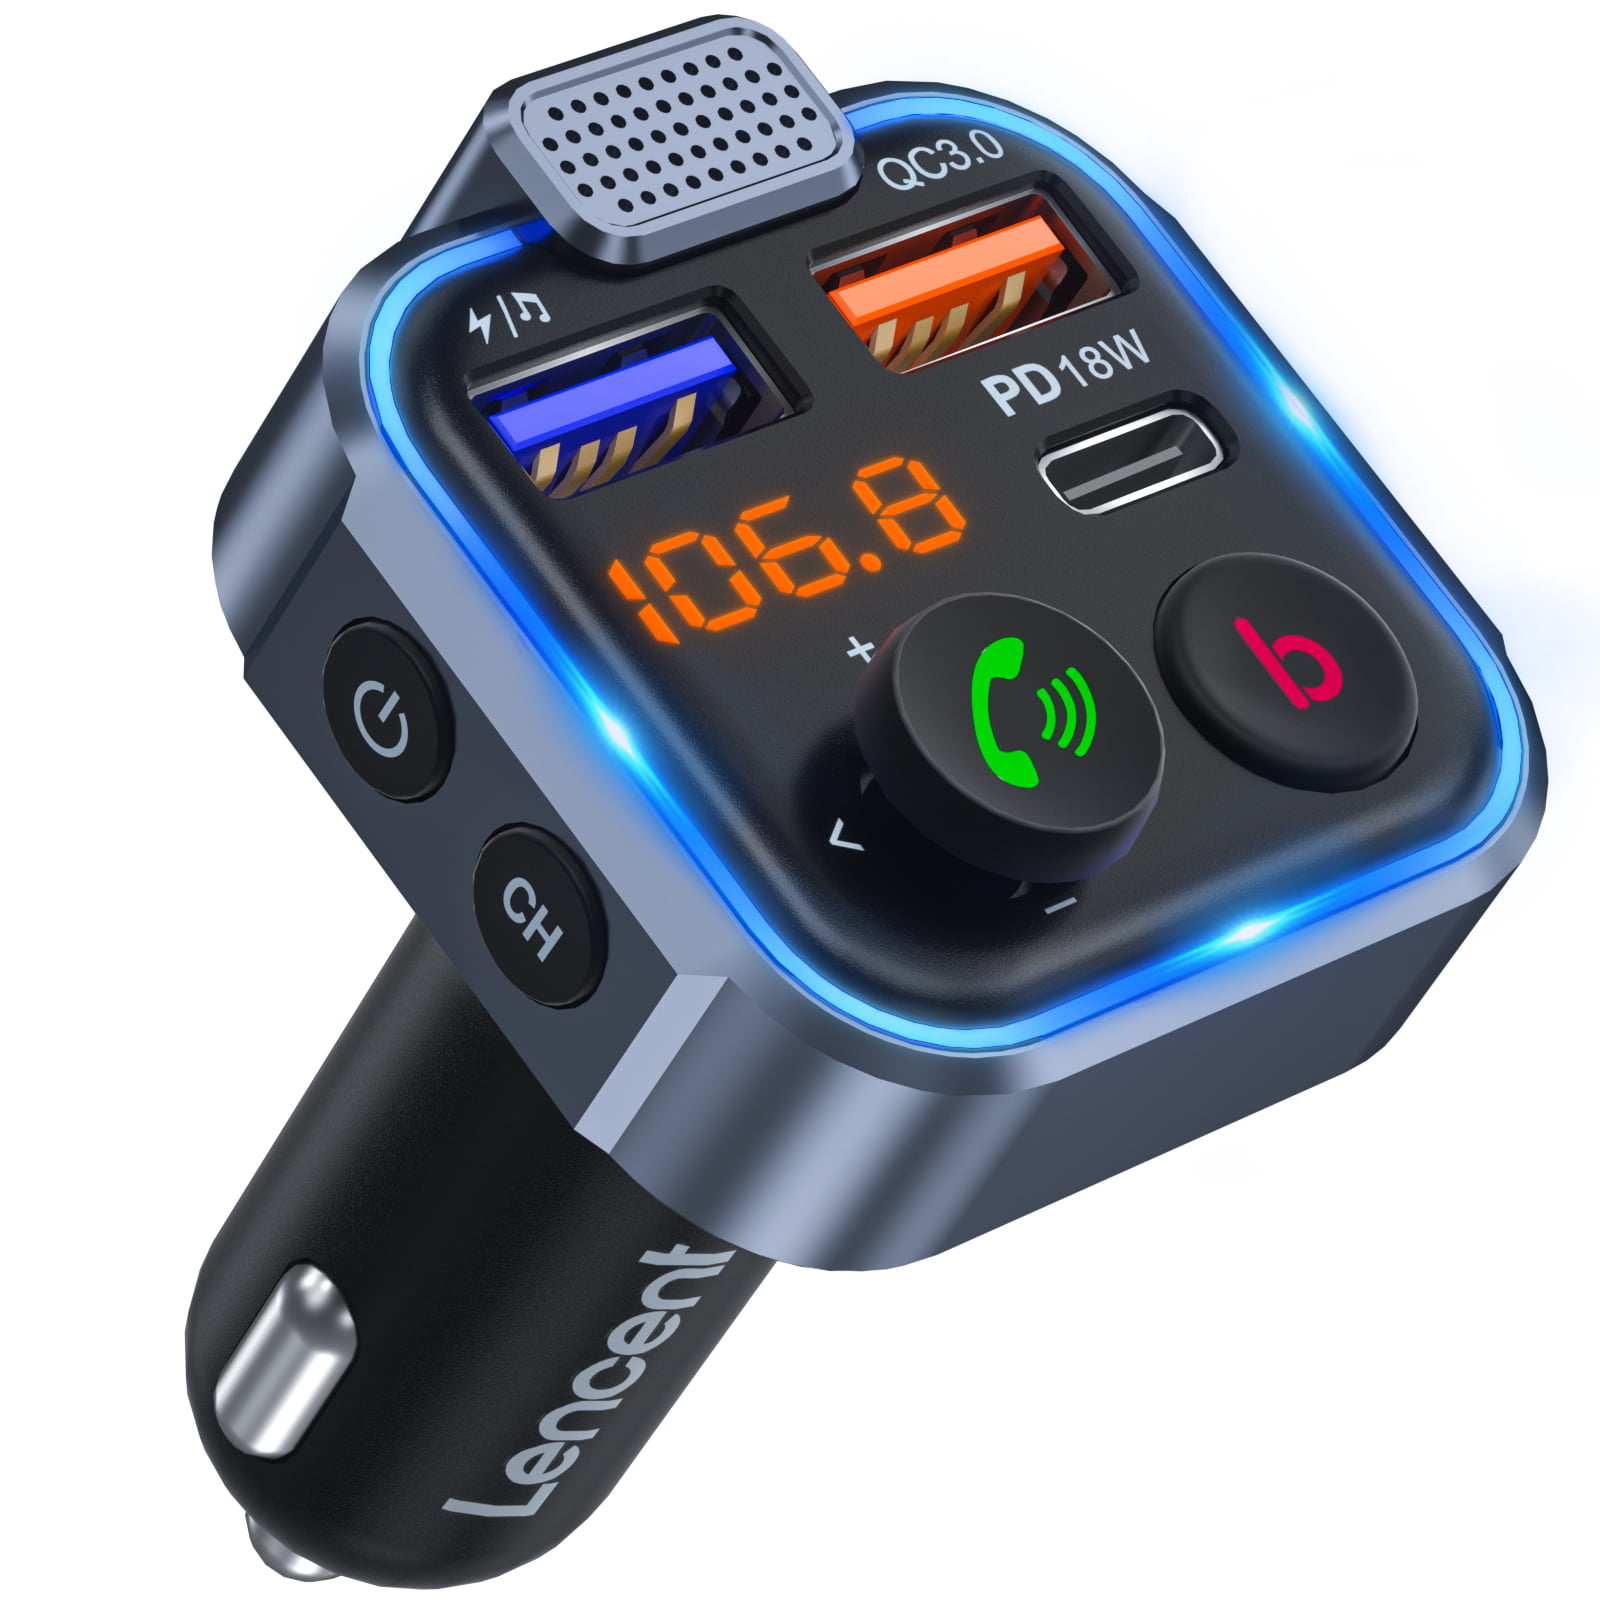 Bluetooth FM Transmitter for Car Audio Adapter Receiver Wireless Hands Free Car Kit with Smart Car Locator and 2 USB Ports Charger Support USB Drive 